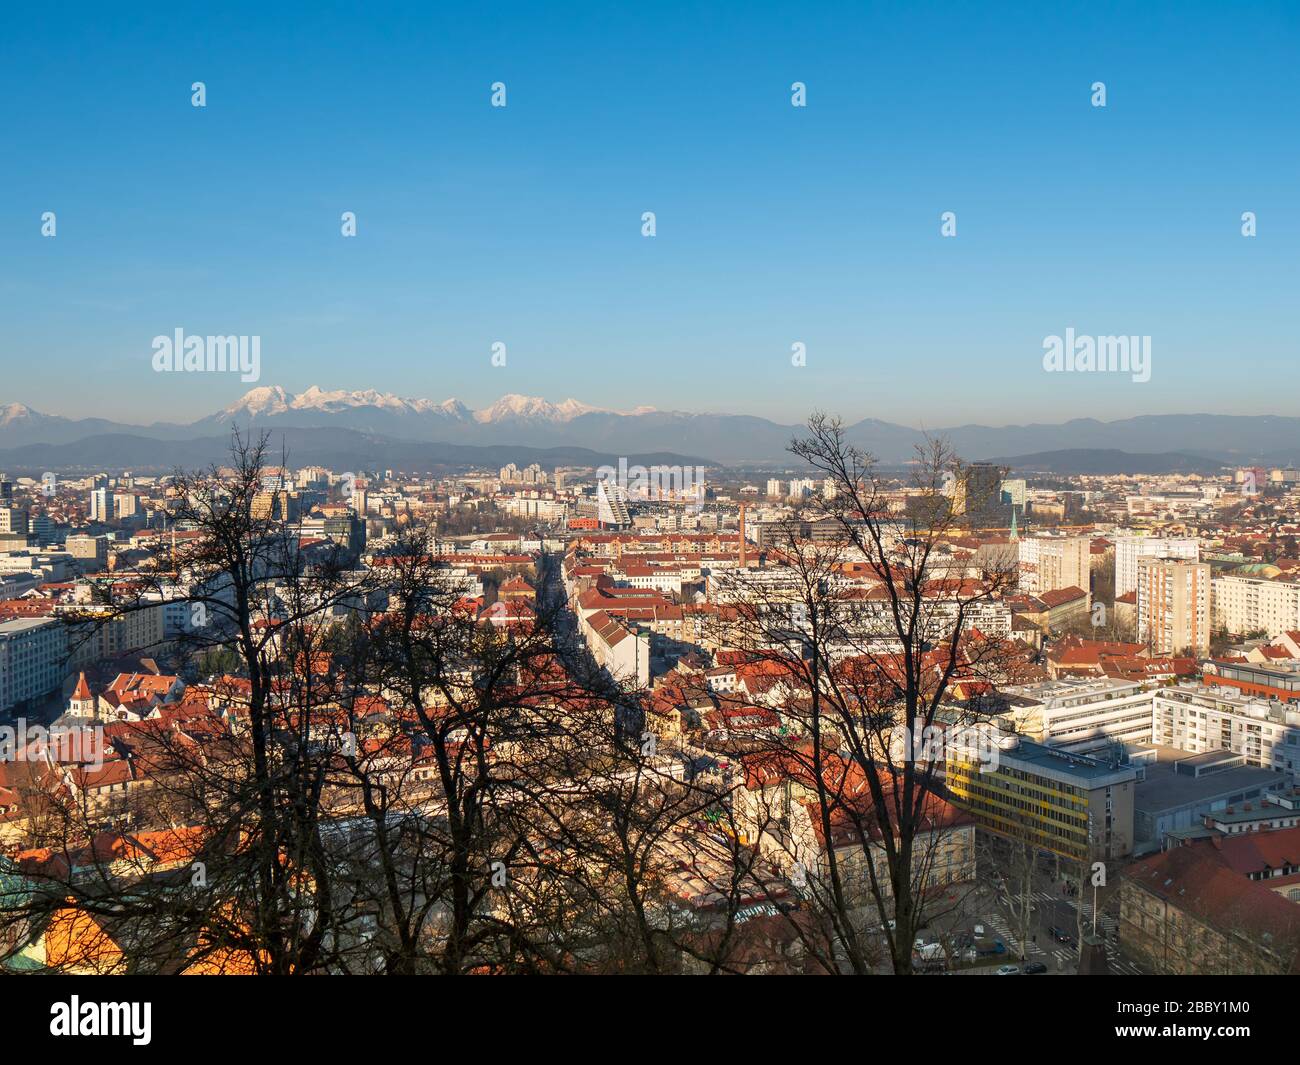 Ljubjlana Slovenia rooftop cityscape skyline panoramic view of old town architecture and Alps mountains, blue sky overhead. Stock Photo